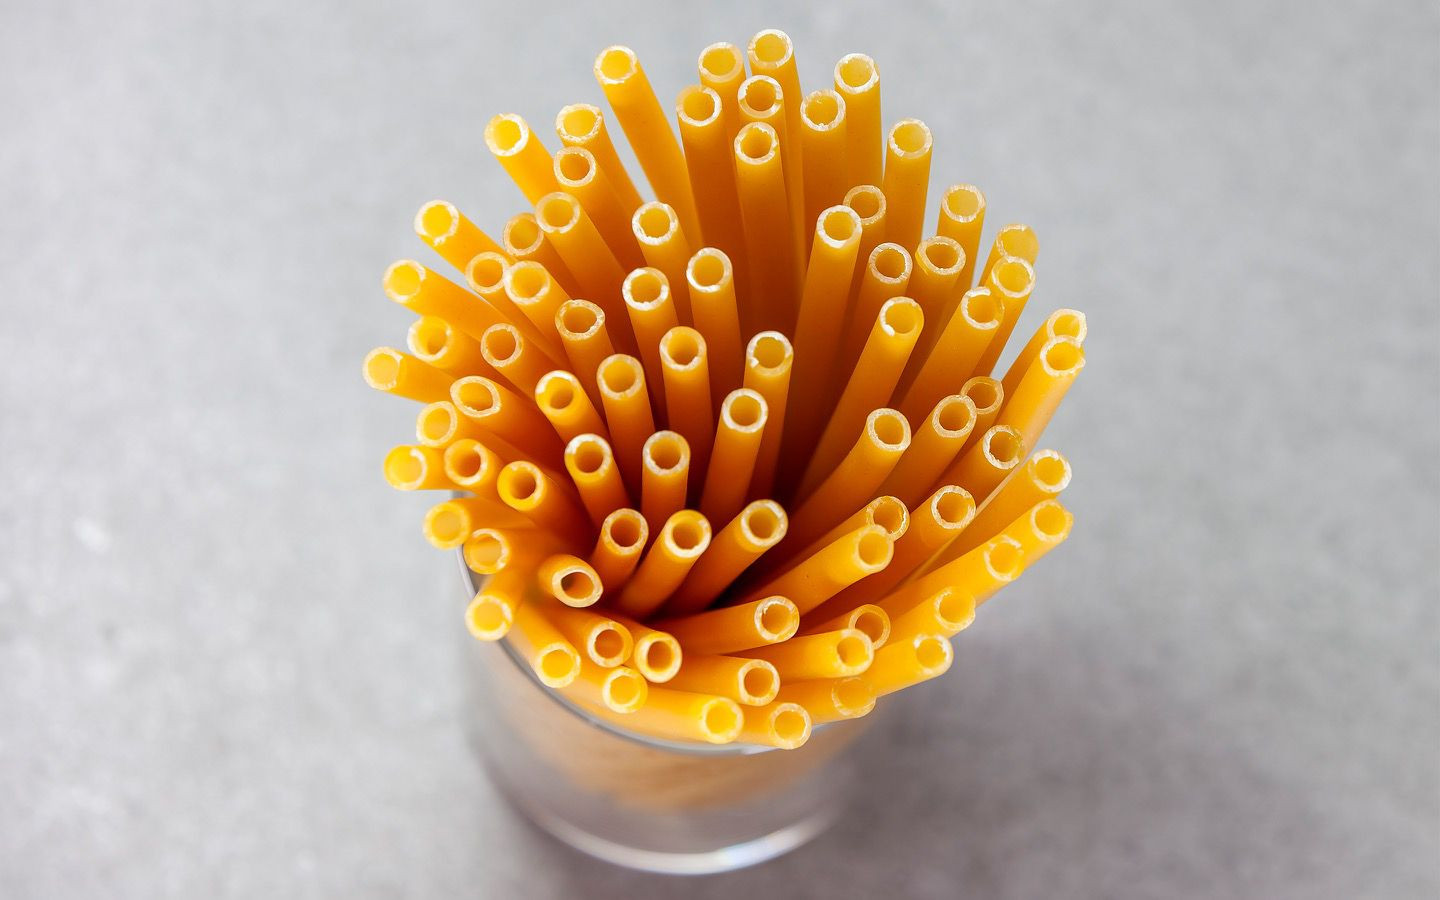 Stroodles - The Pasta Straws